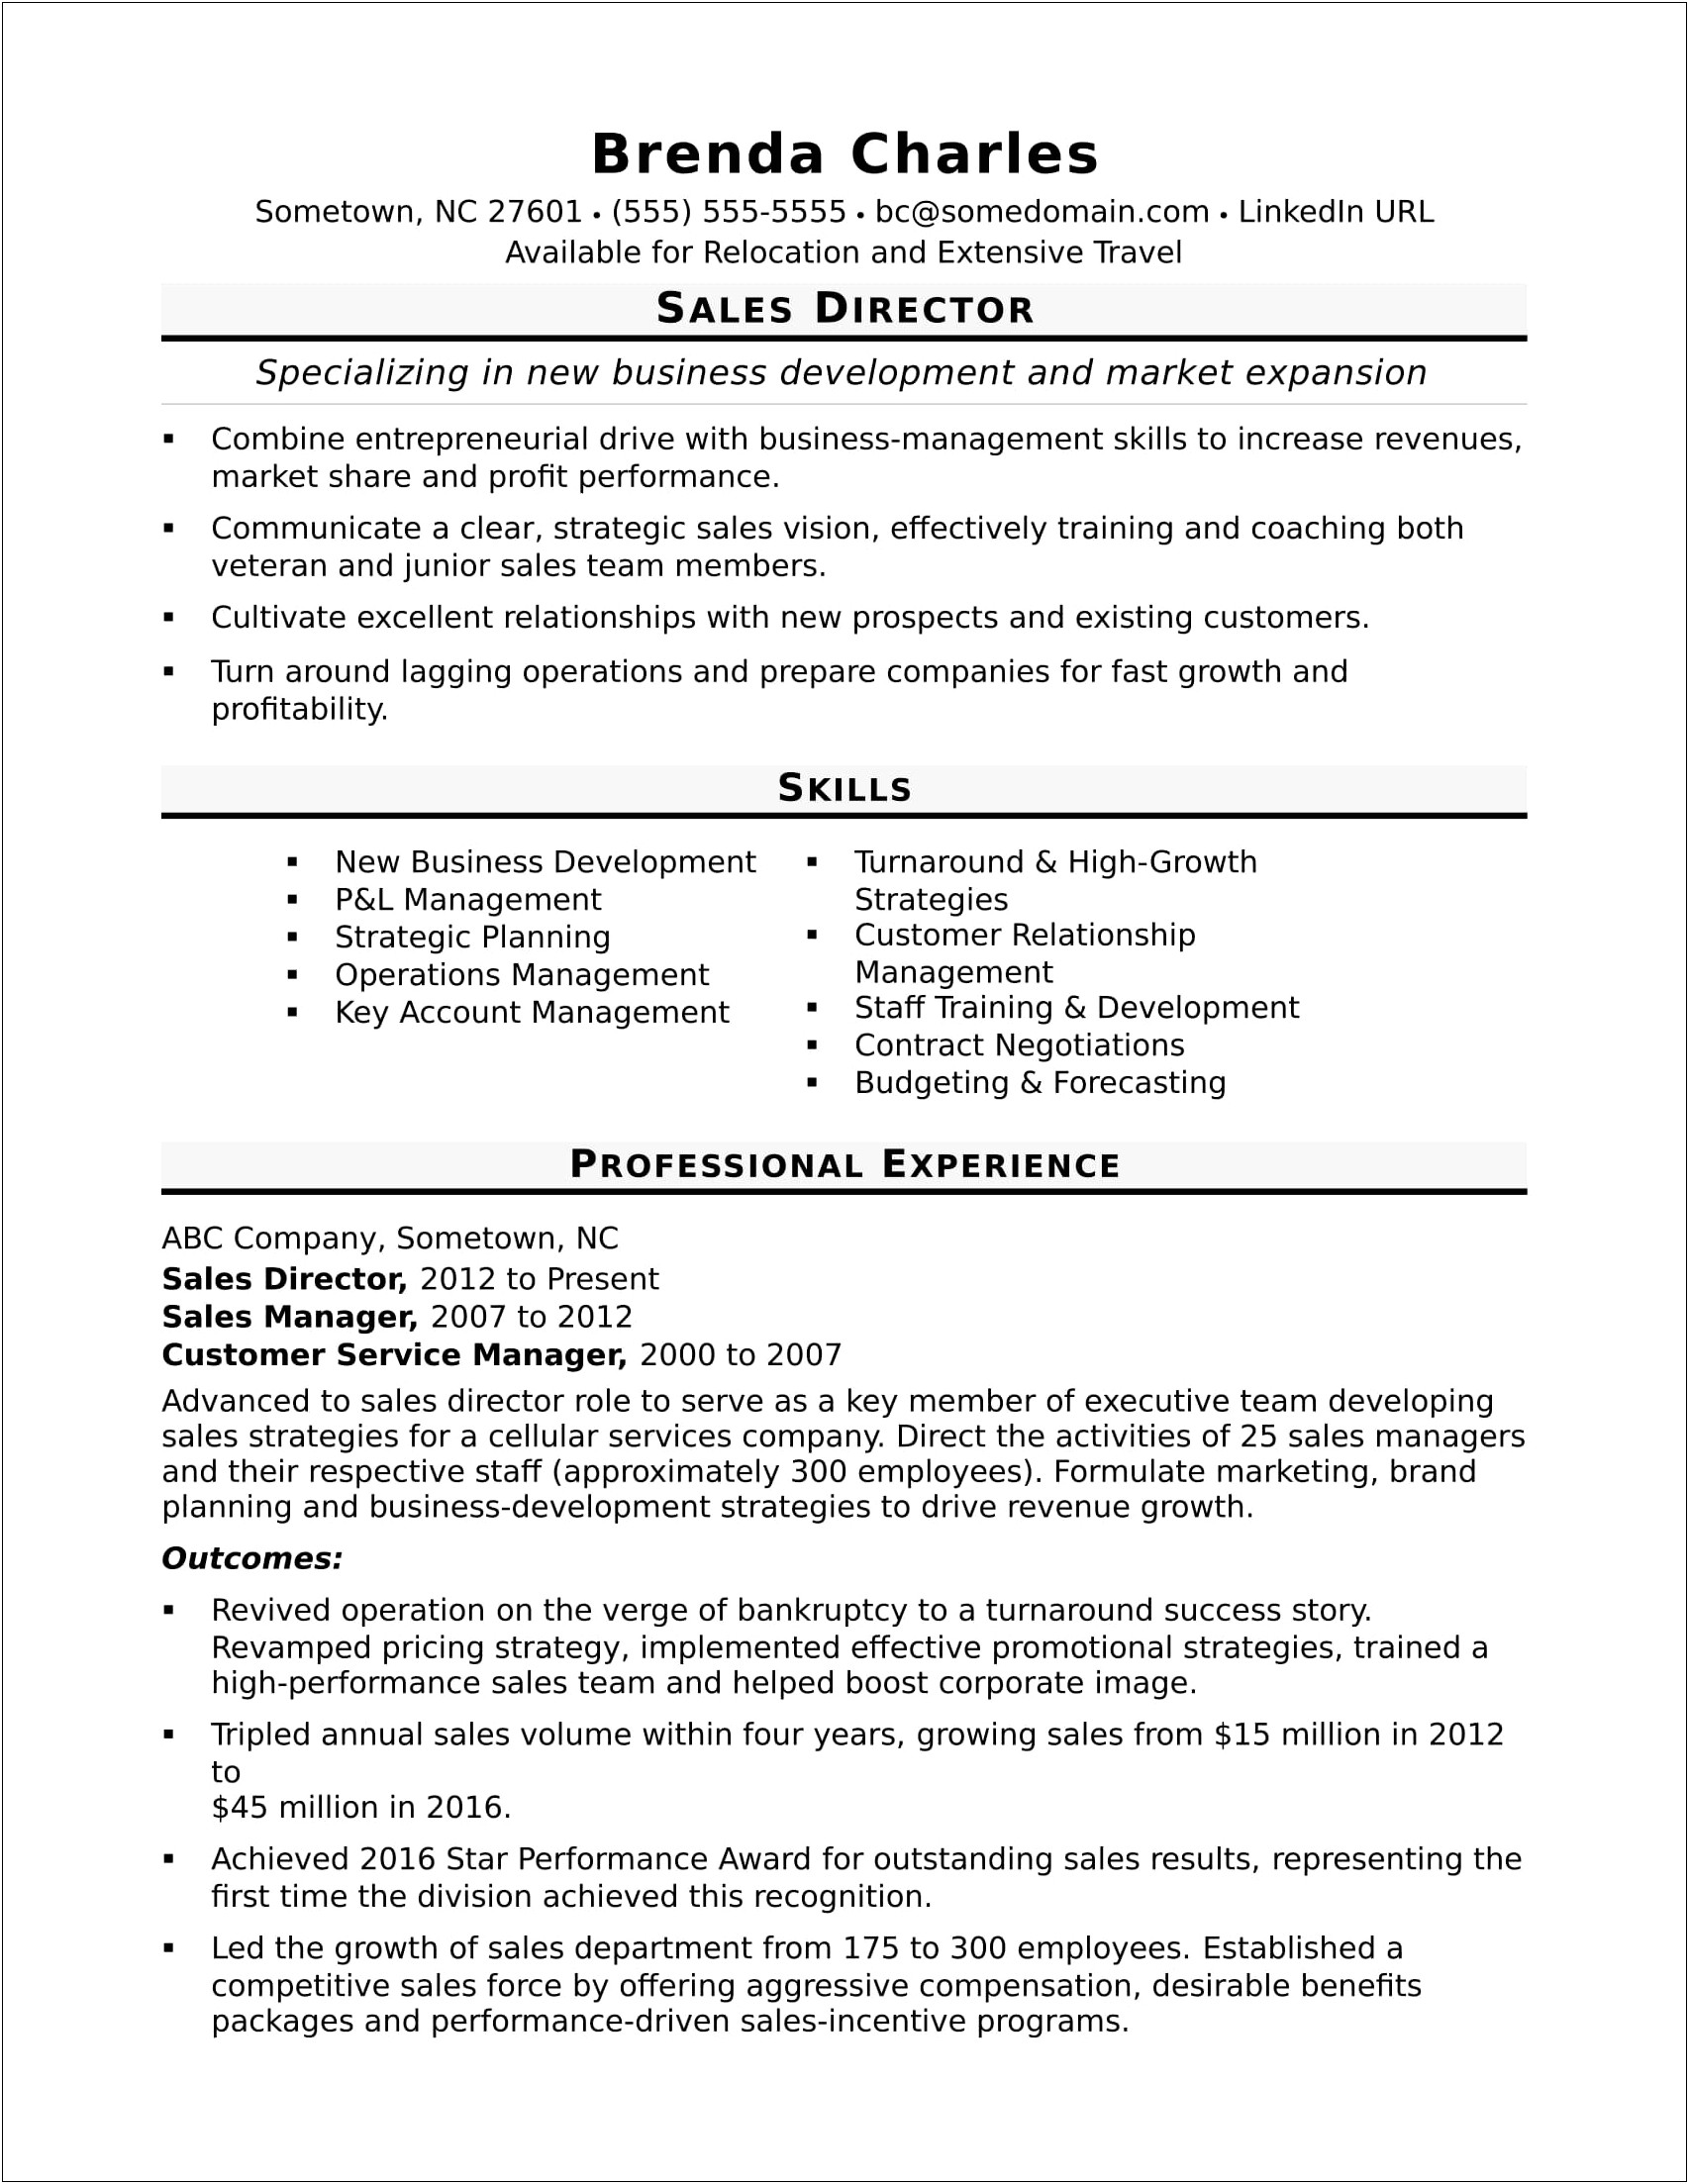 Resume Examples For Hotel Sales